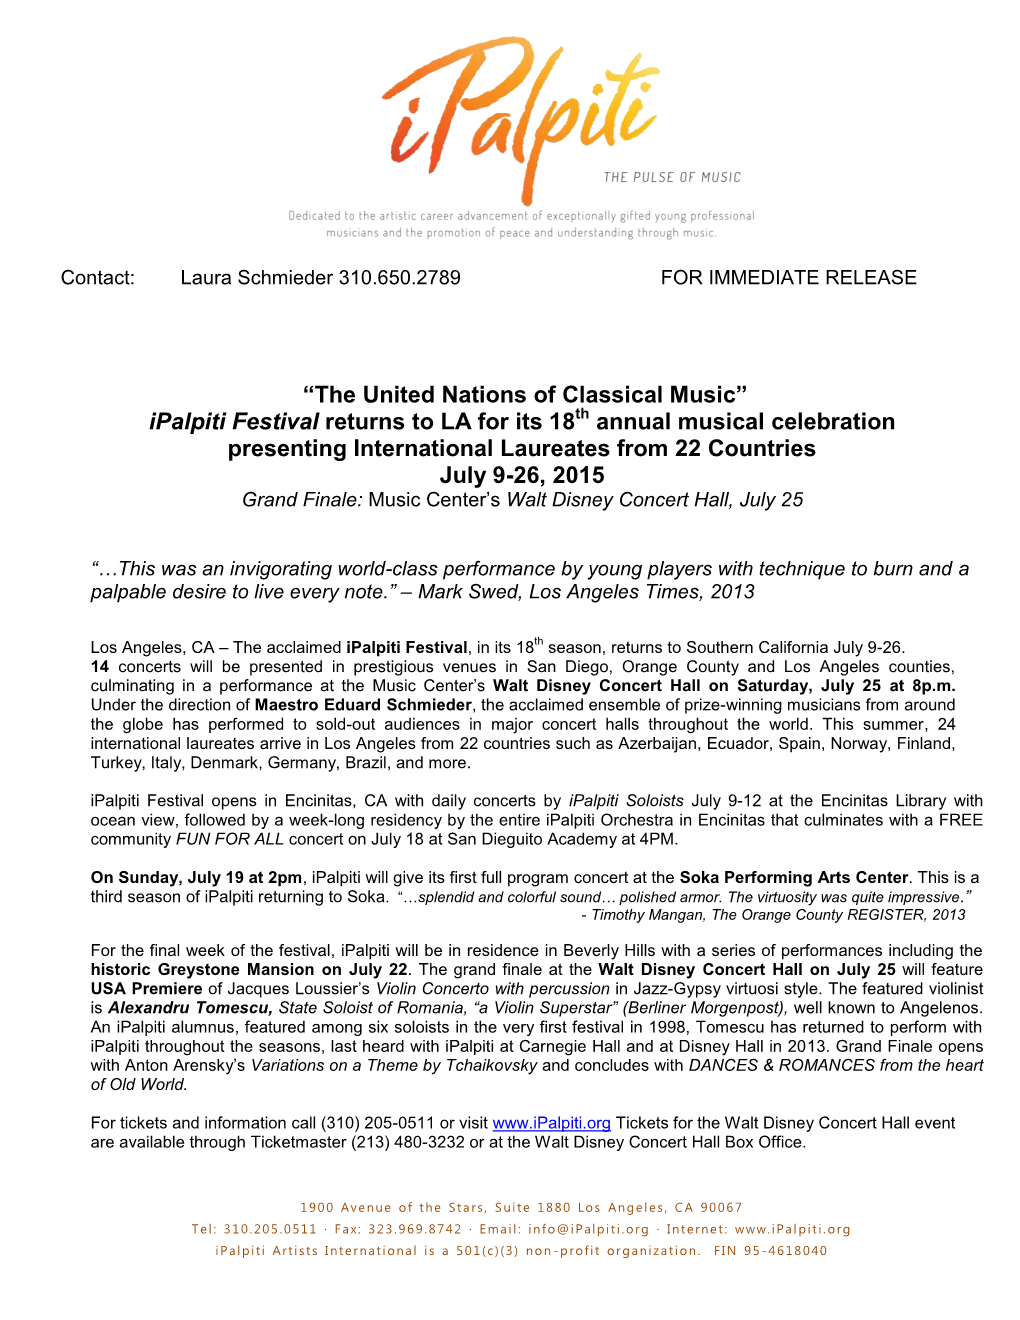 “The United Nations of Classical Music” Ipalpiti Festival Returns to LA